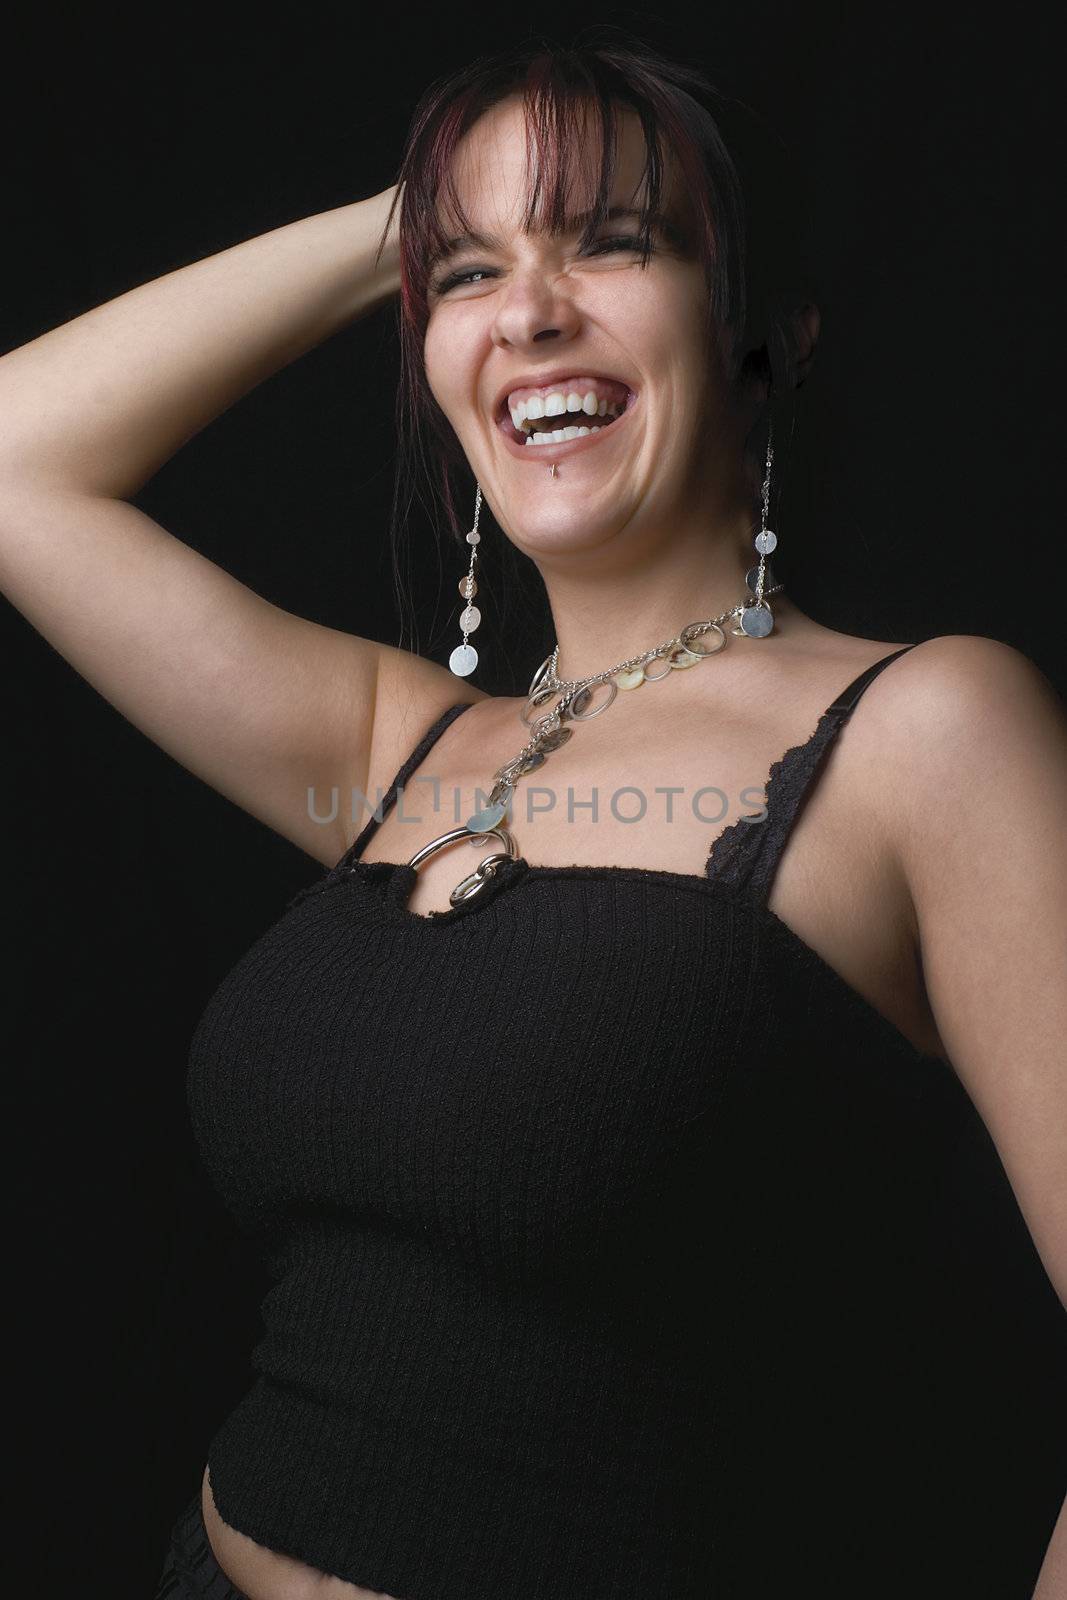 Twenty something fashion model in full hearted laugh while posing